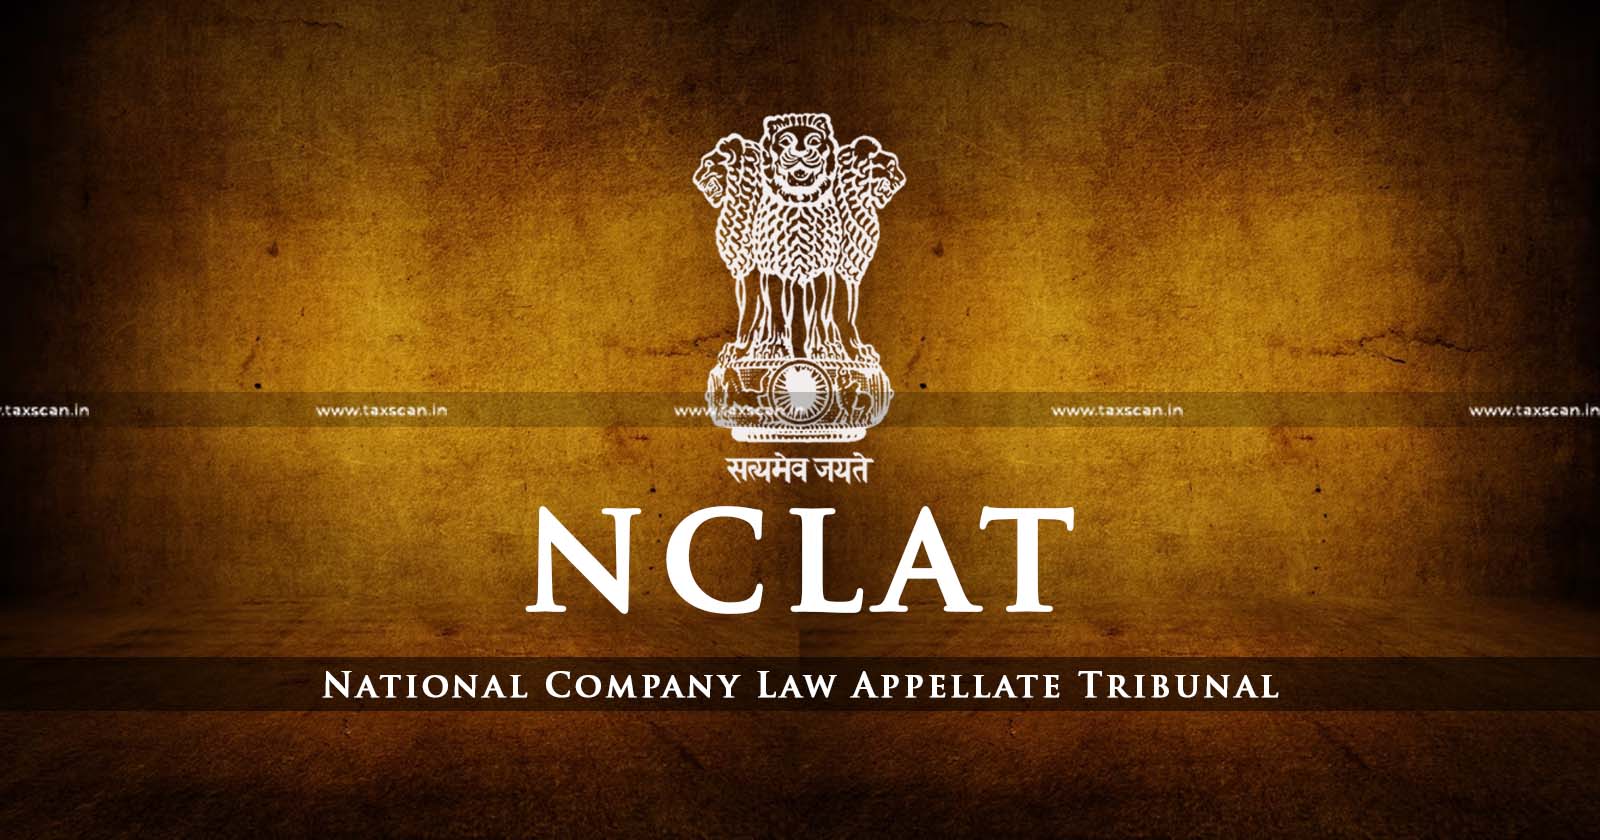 CIRP - NCLAT National Company Law Appellate Tribunal - TAXSCAN